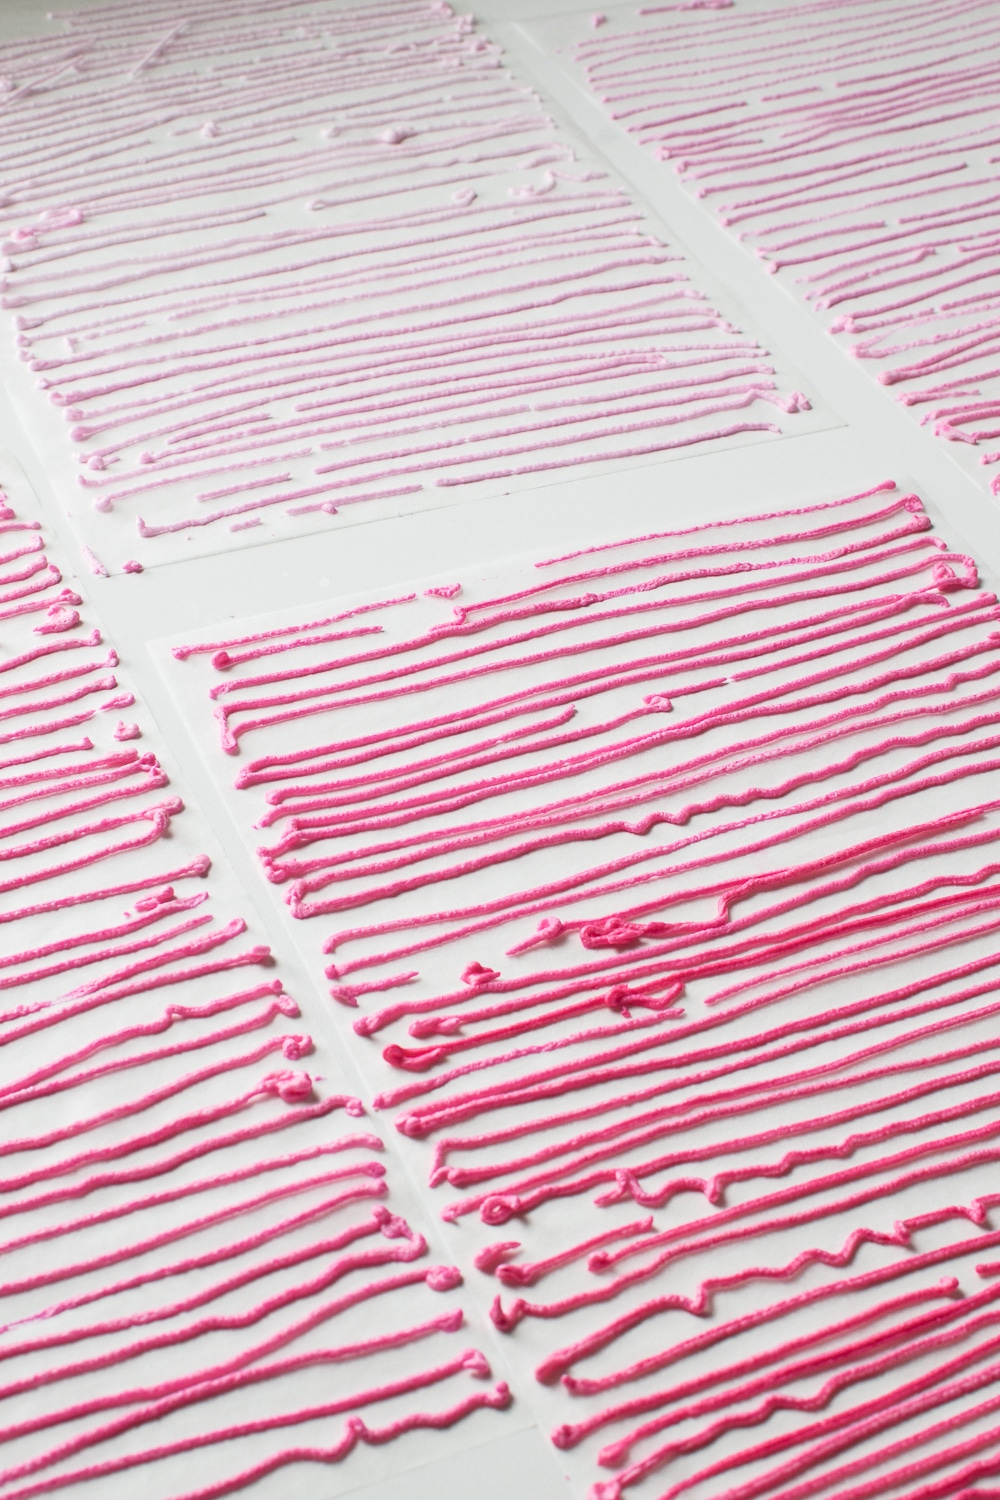 Lines of sugar-free royal icing drying on parchment sheets 